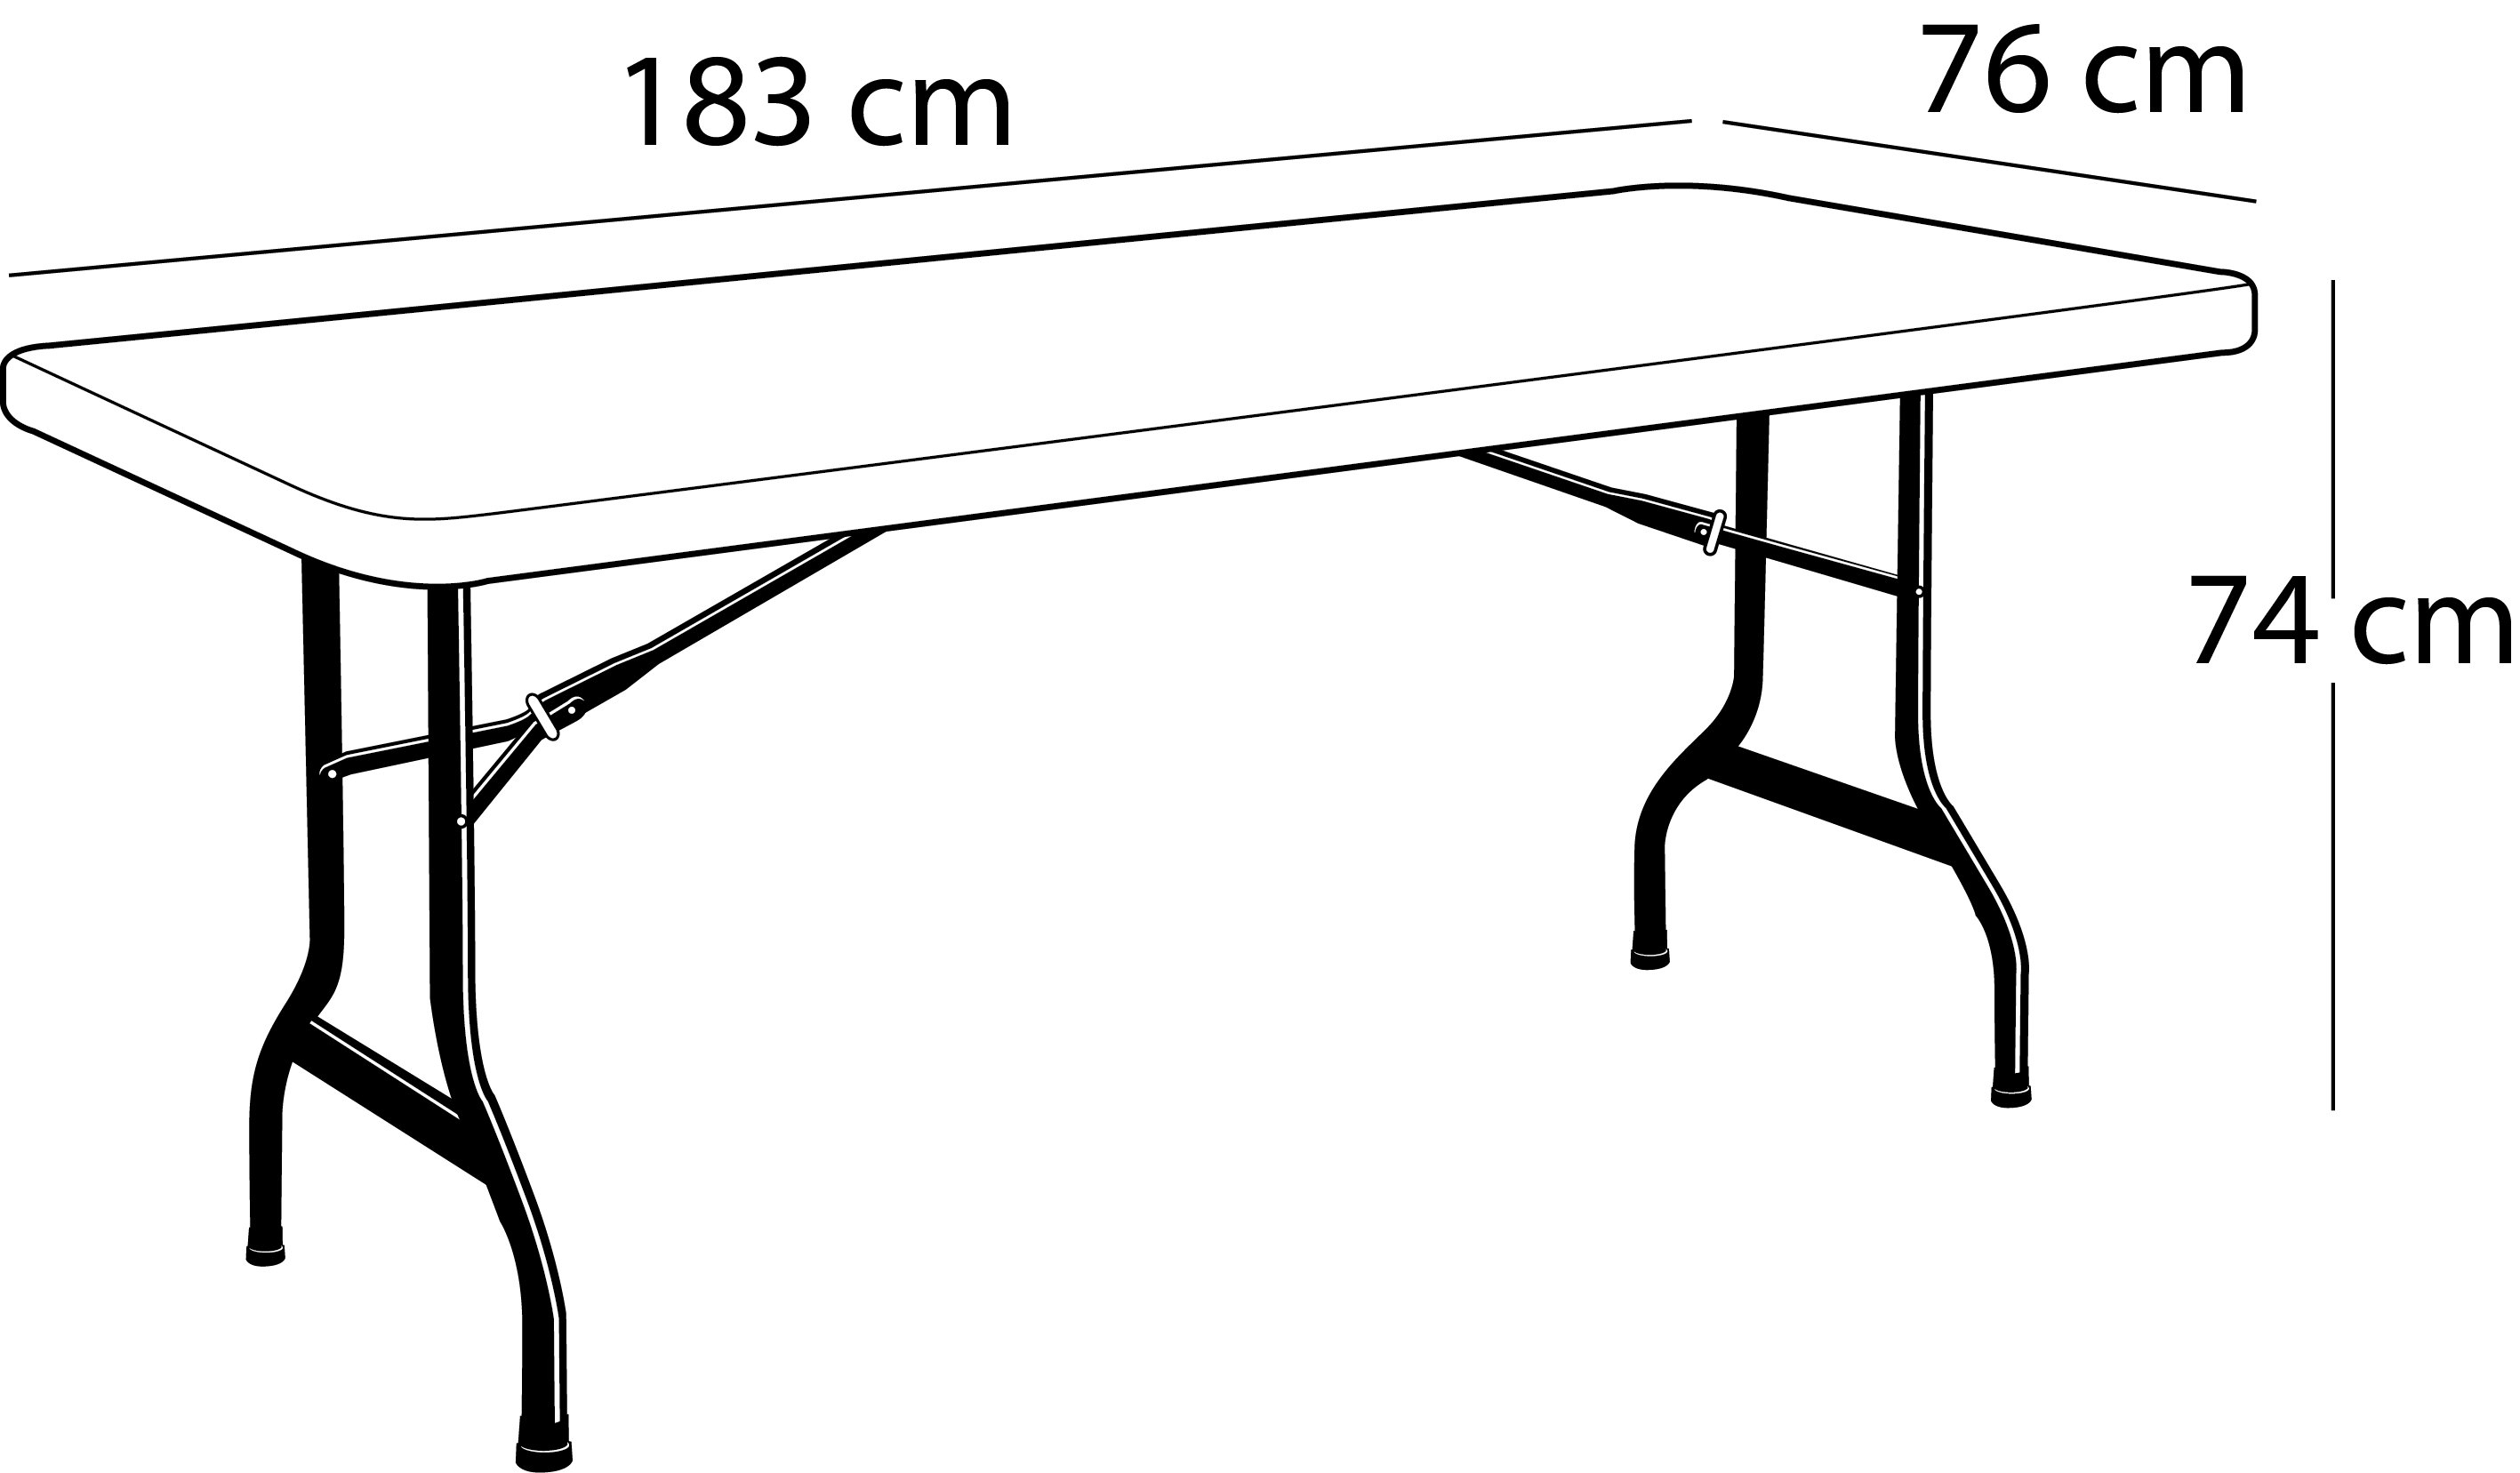 6ft Rectangular folding table 183cm (almond) / 8 people / heavy commercial